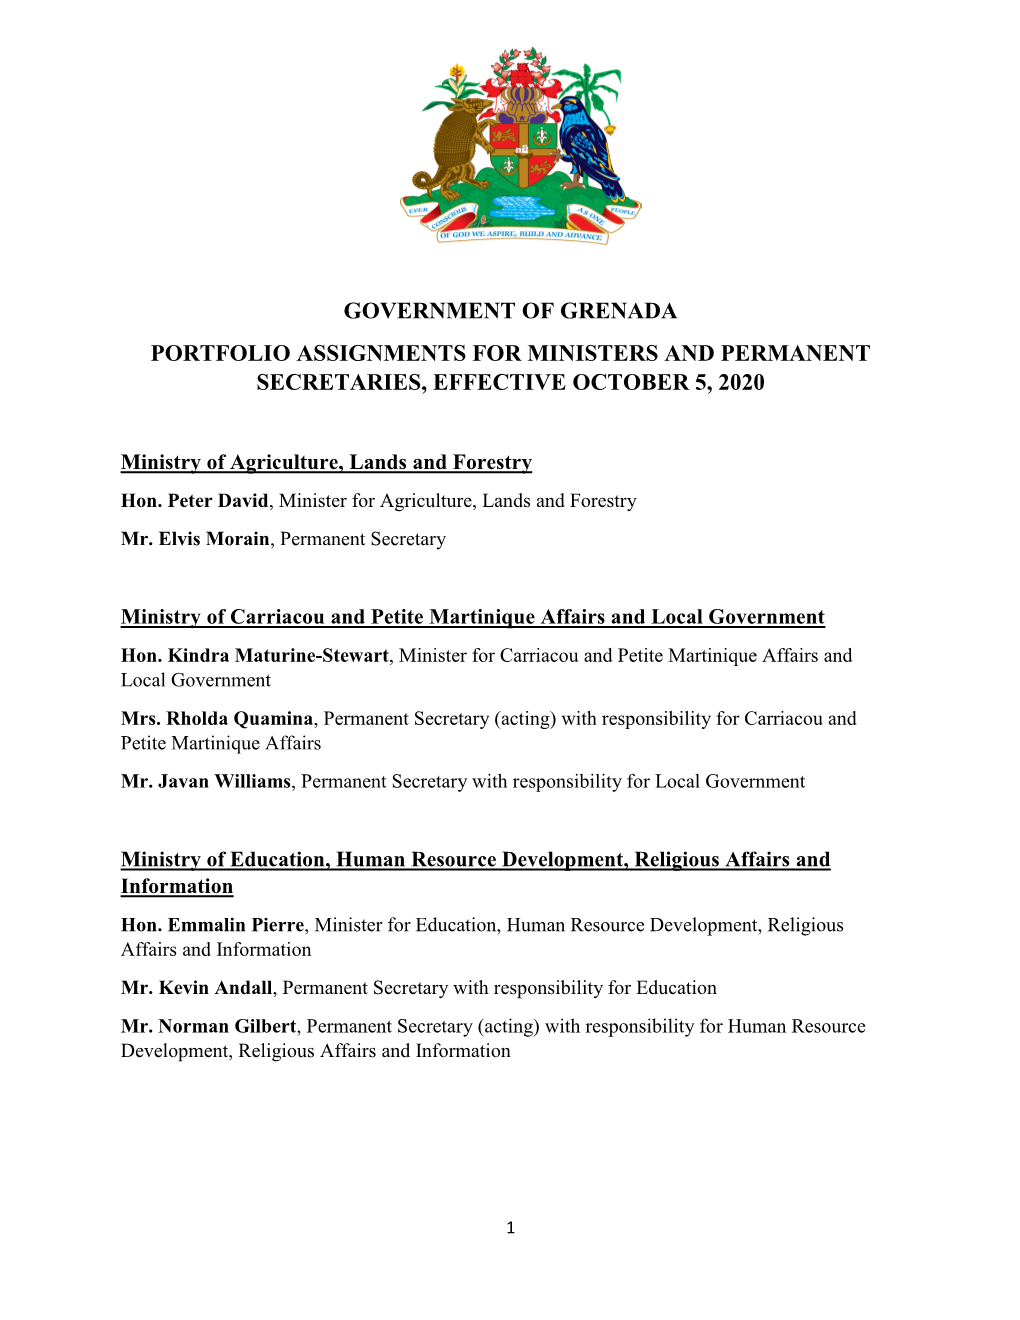 Government of Grenada Portfolio Assignments for Ministers and Permanent Secretaries, Effective October 5, 2020